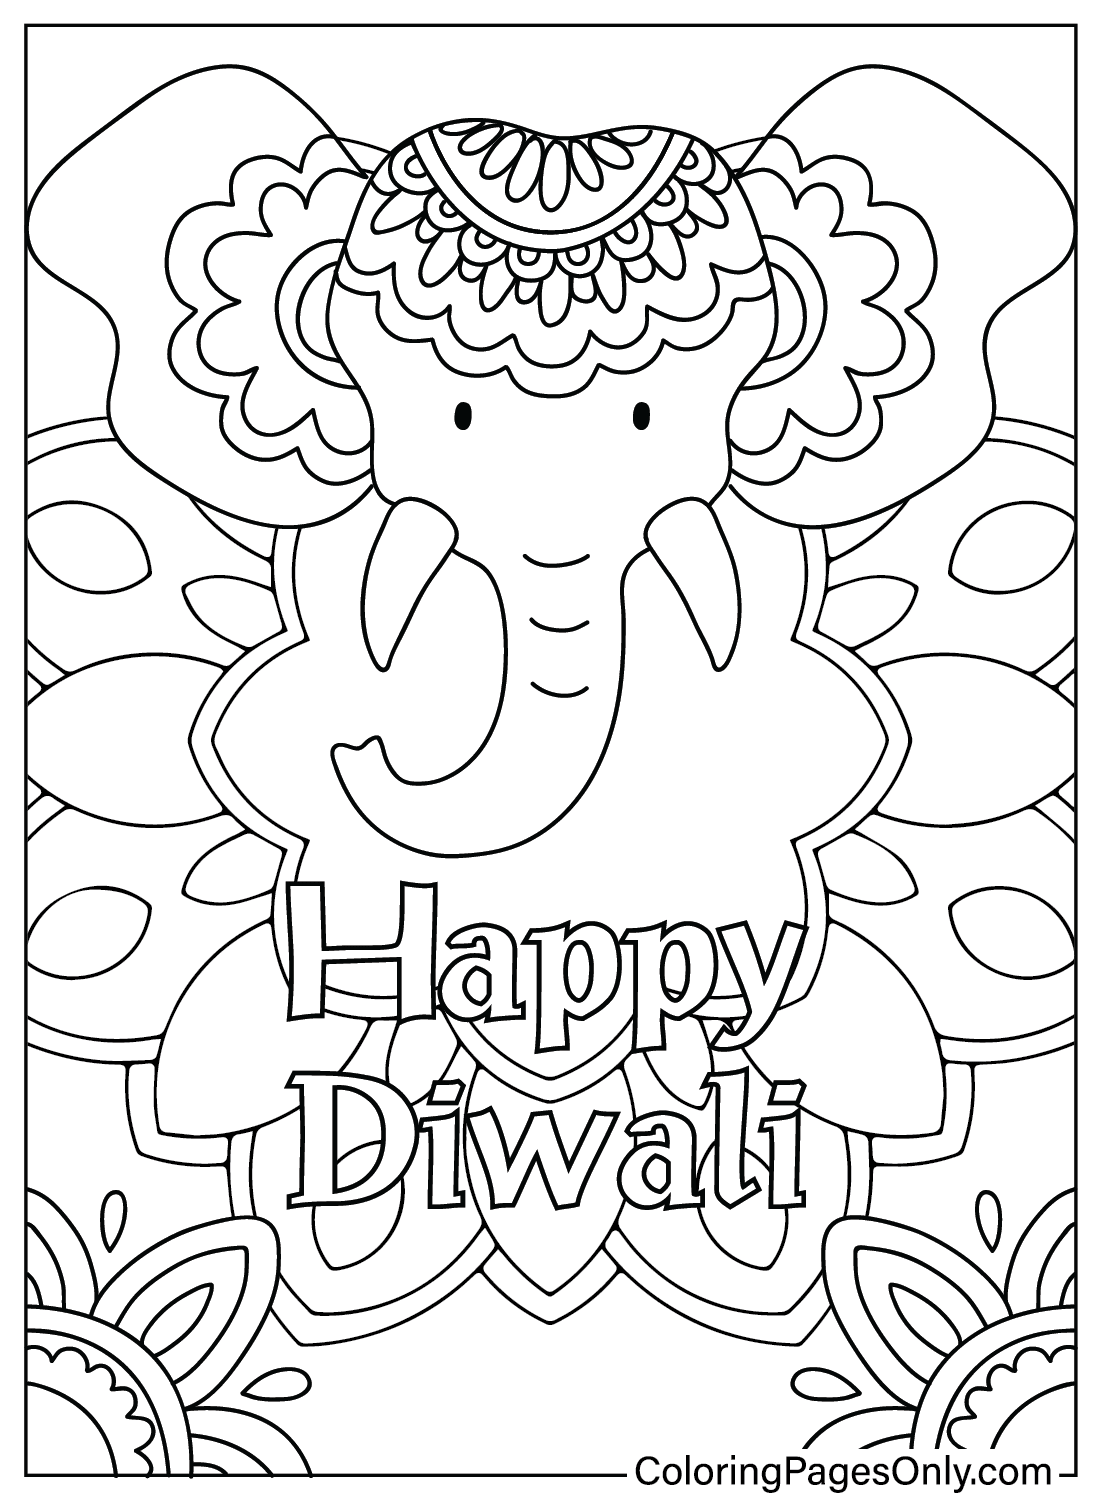 Diwali Free Coloring Page from Diwali